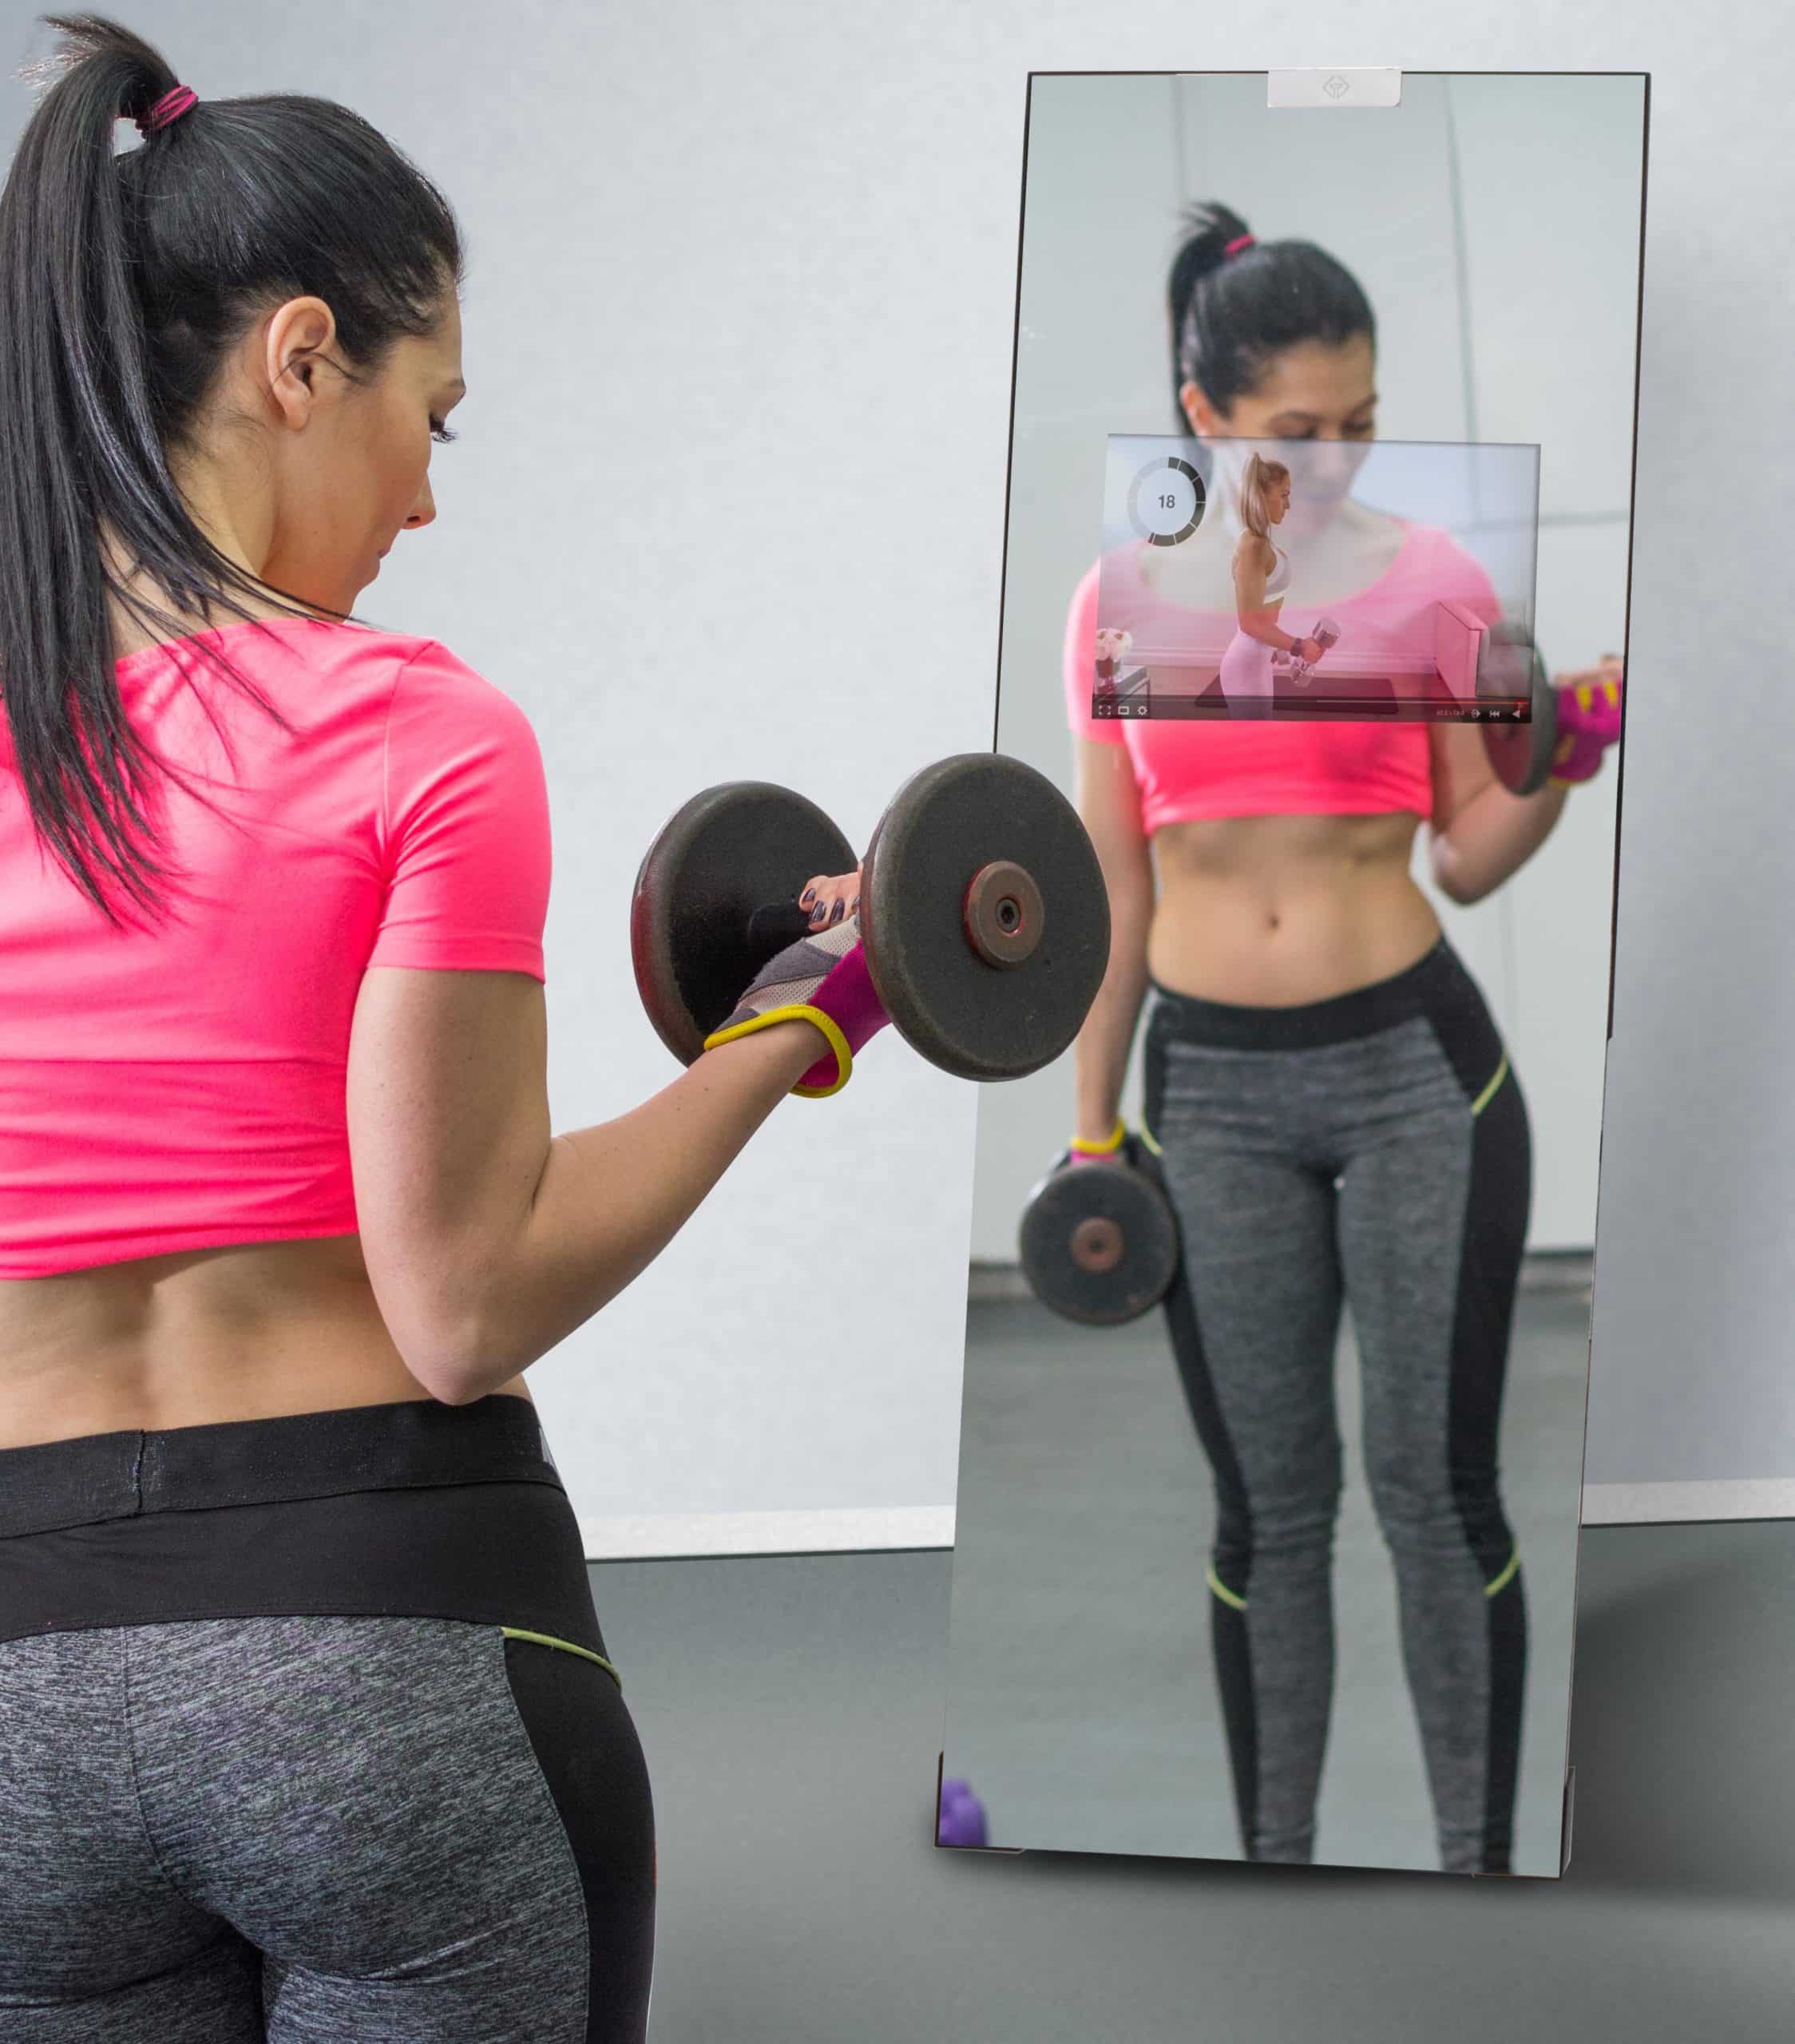 Top 5 YouTube Workout Channels For Your Capstone Smart Mirror